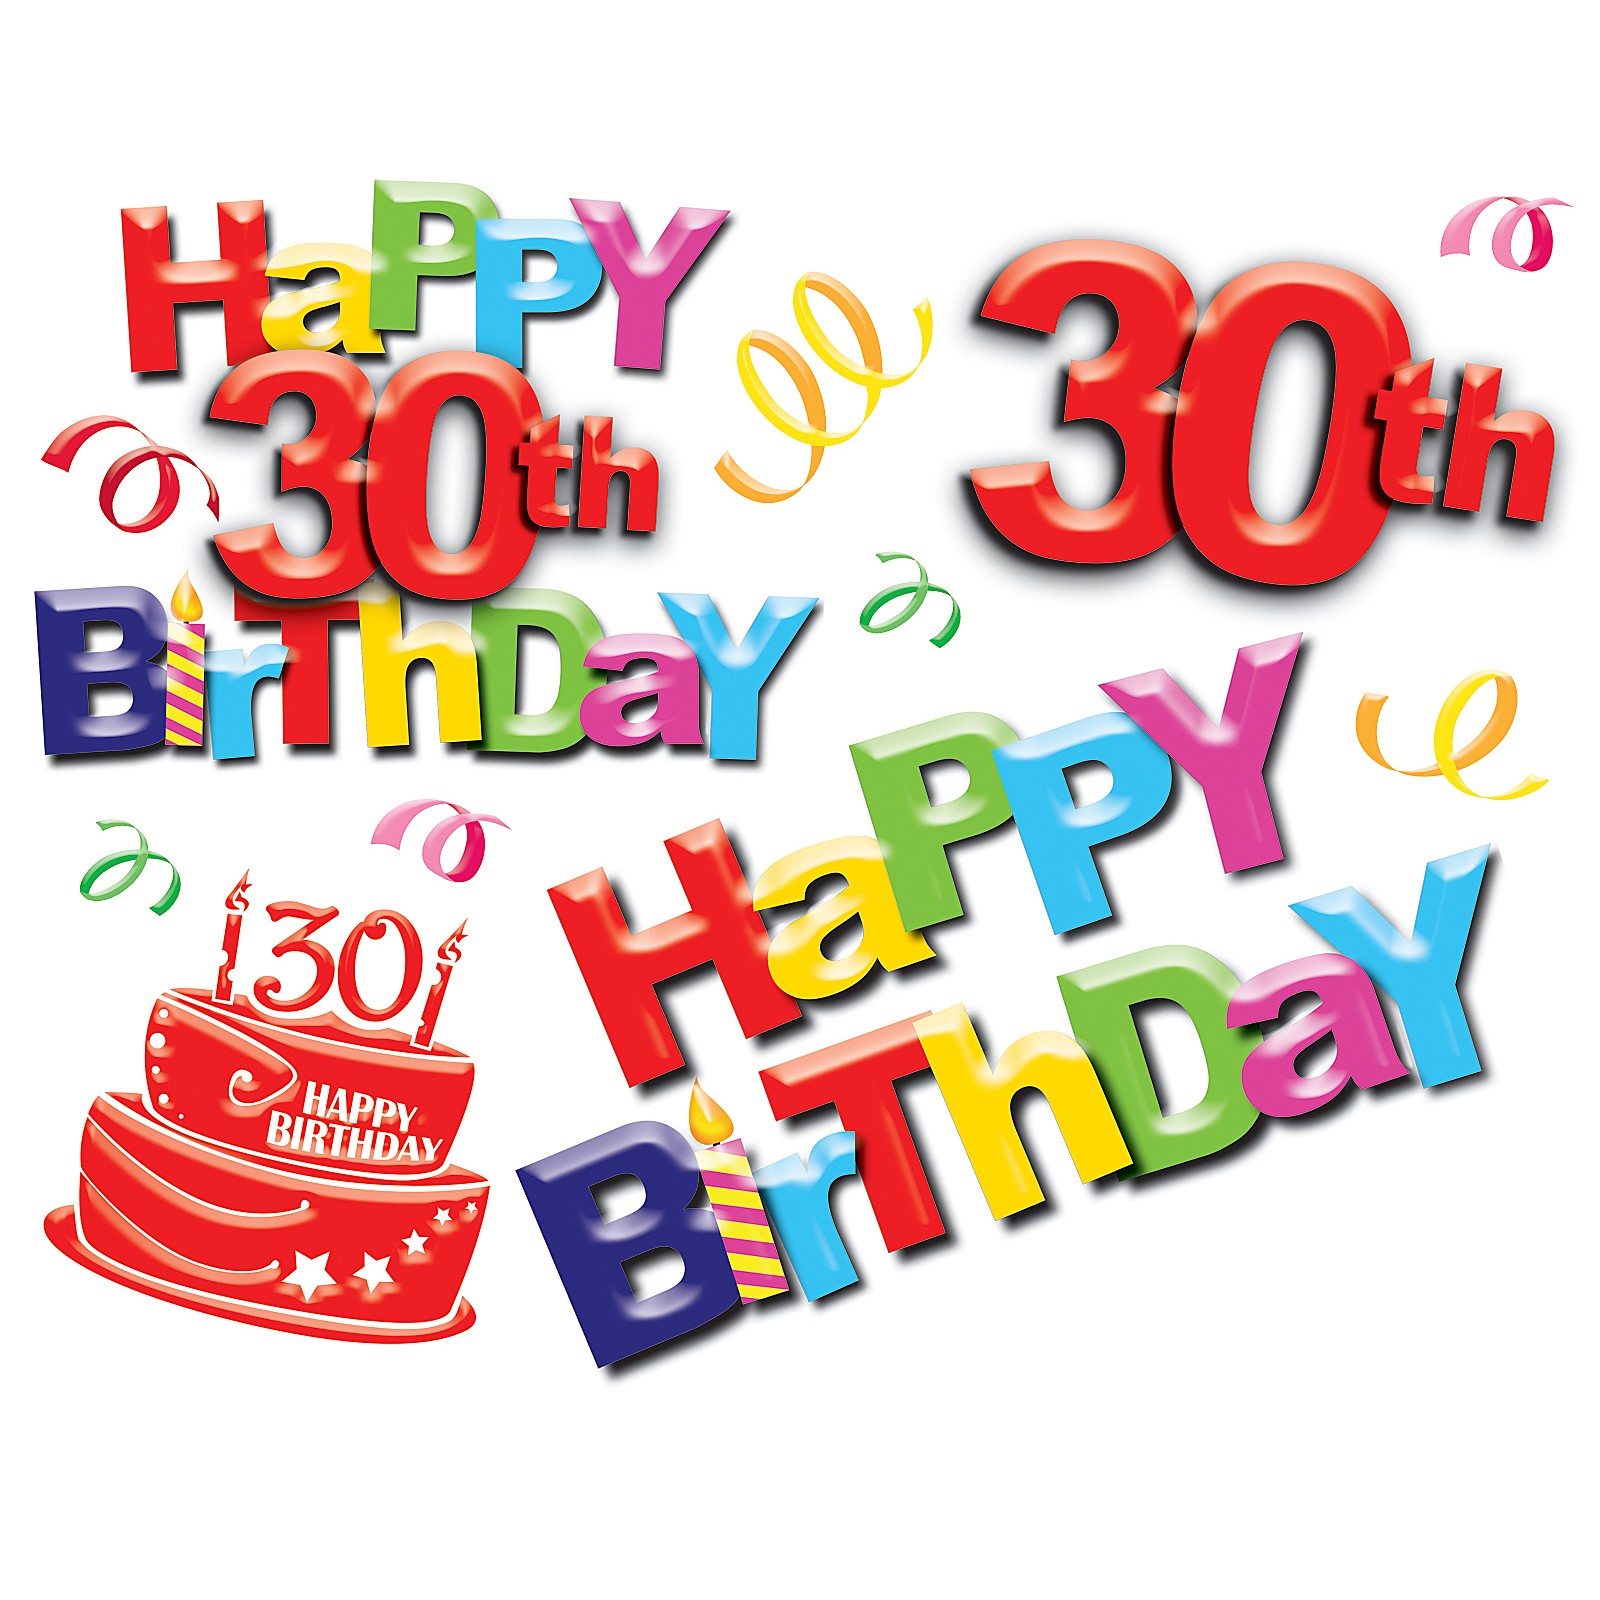 180+ Happy 30th Birthday Wishes, Quotes, Sayings Messages And HD Images